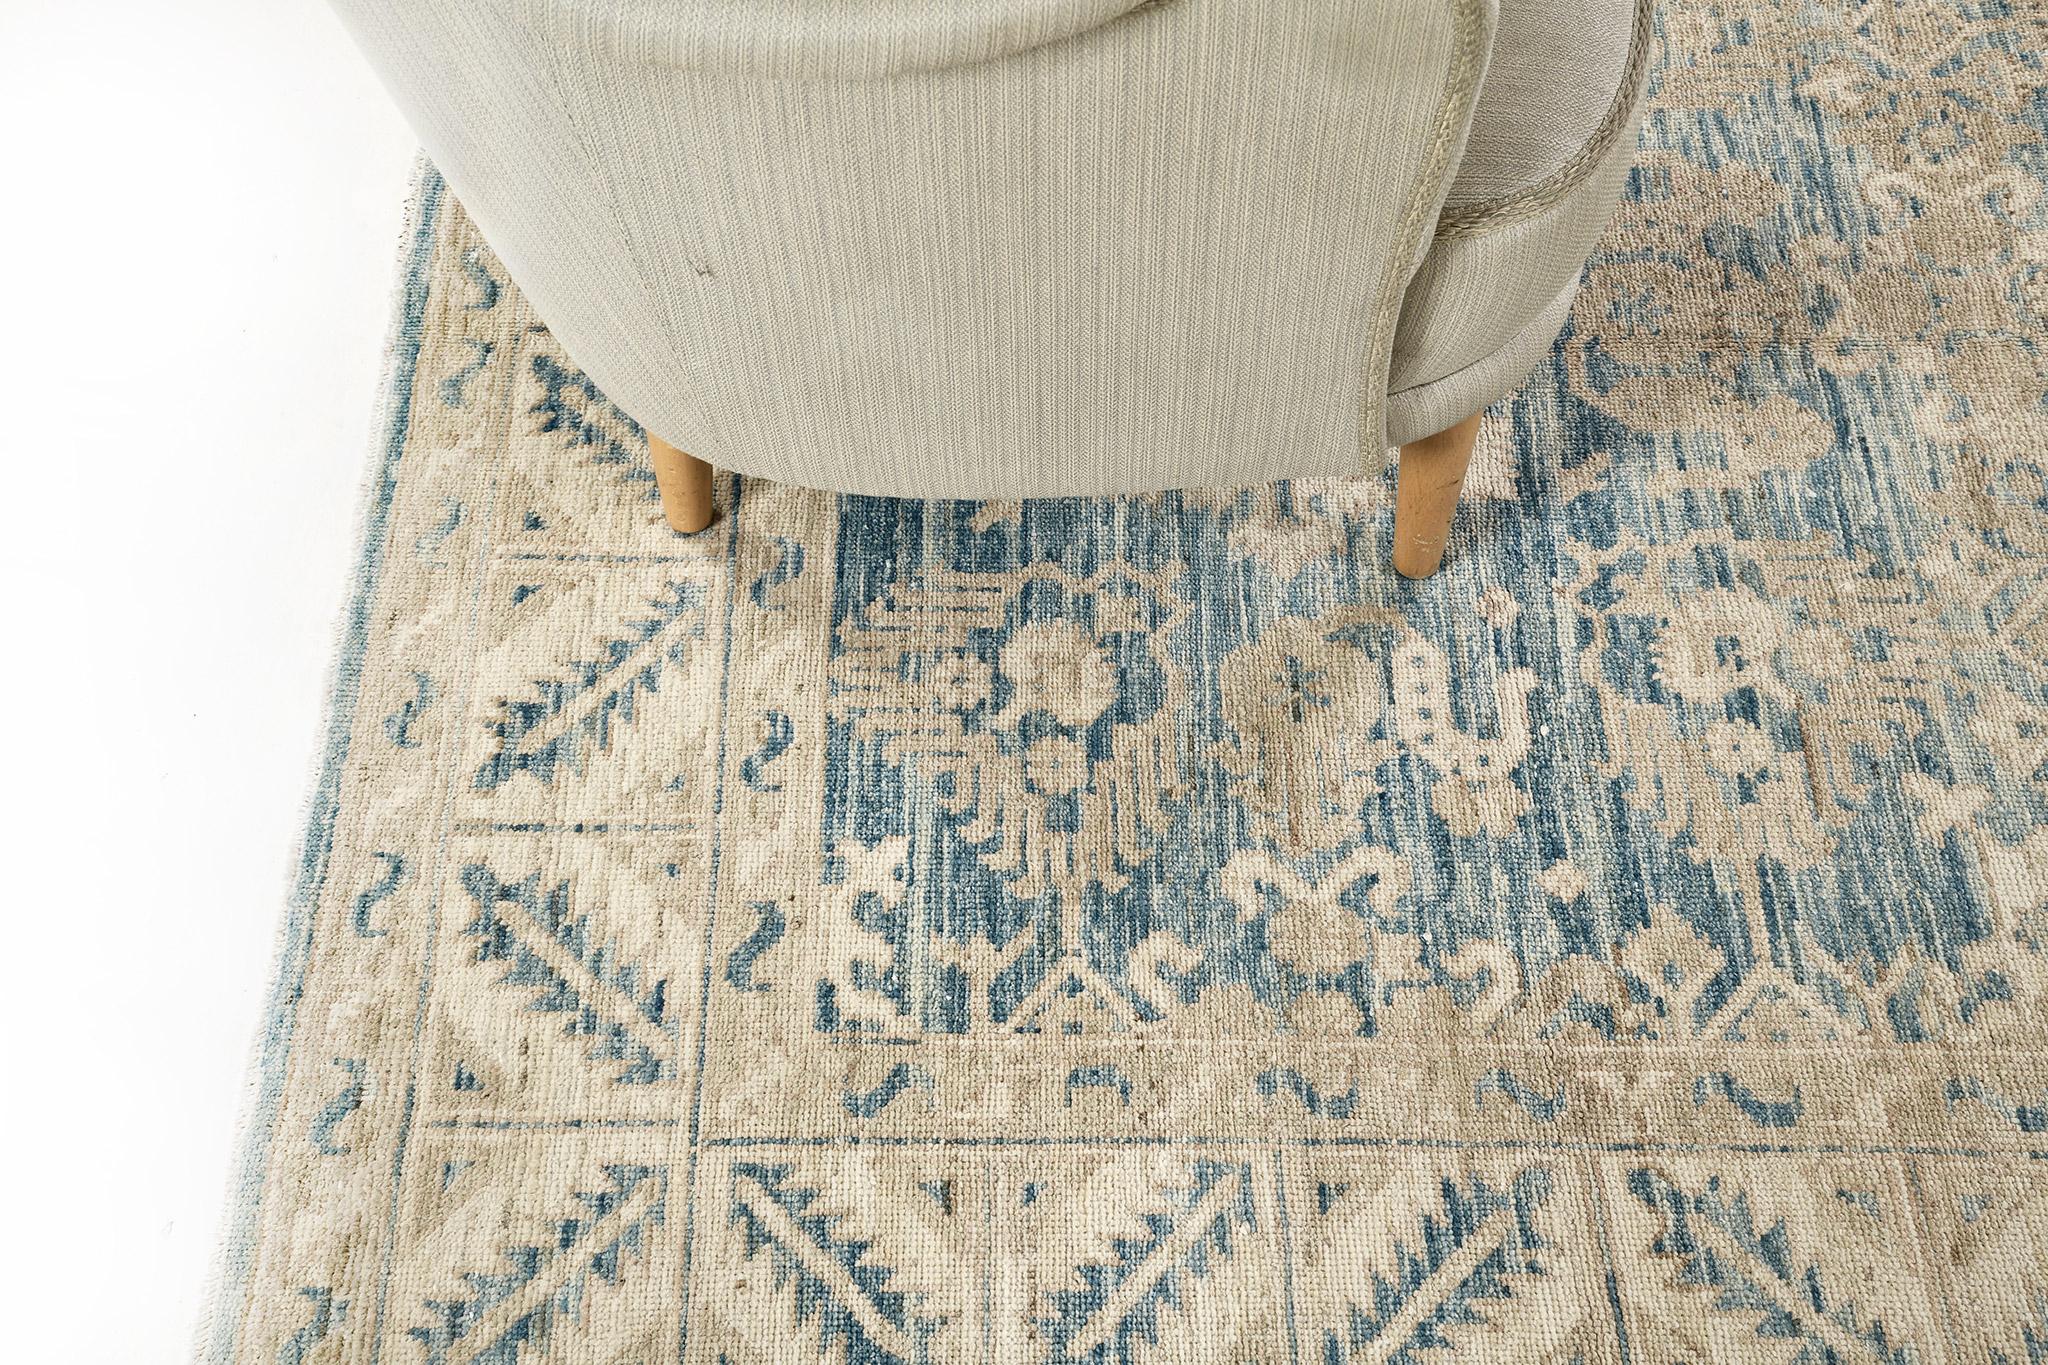 A glorious revival rug in Safira Collection with muted tone palette showcasing its striking appeal and brilliant architectural elements. This elegant rug can perfectly fit into a contemporary, modern and traditional interiors. It features a cobalt